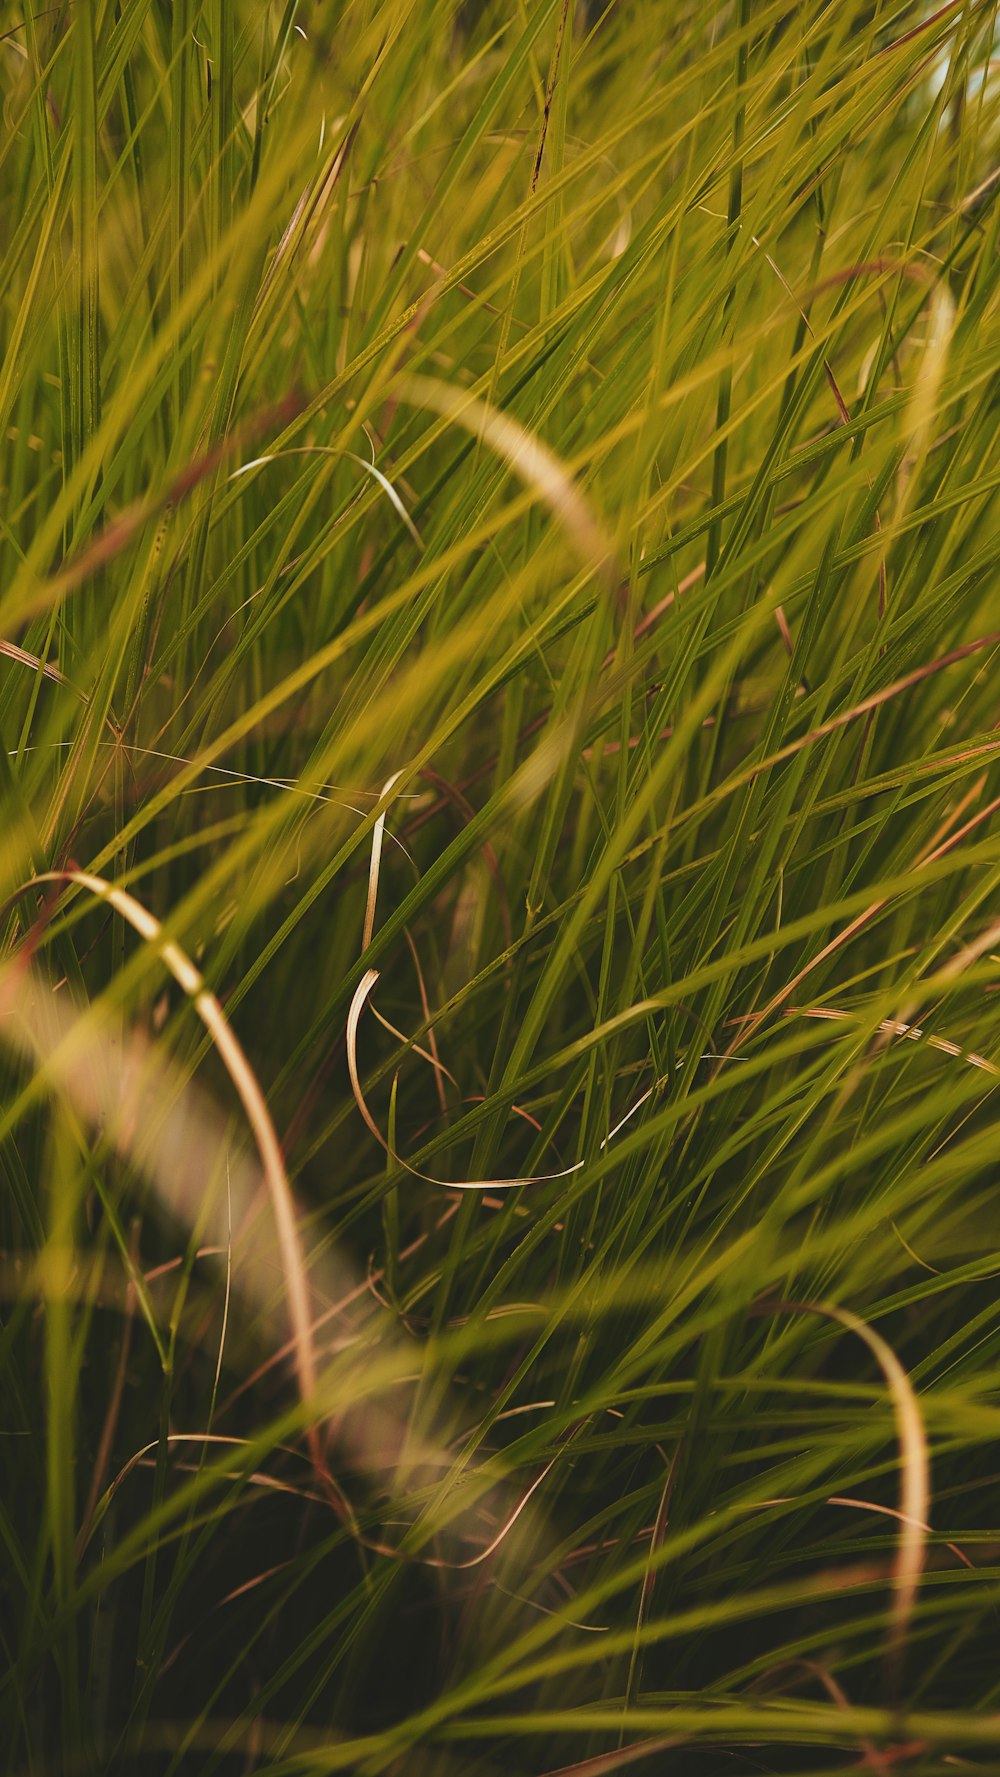 a close up of some grass with a sky in the background